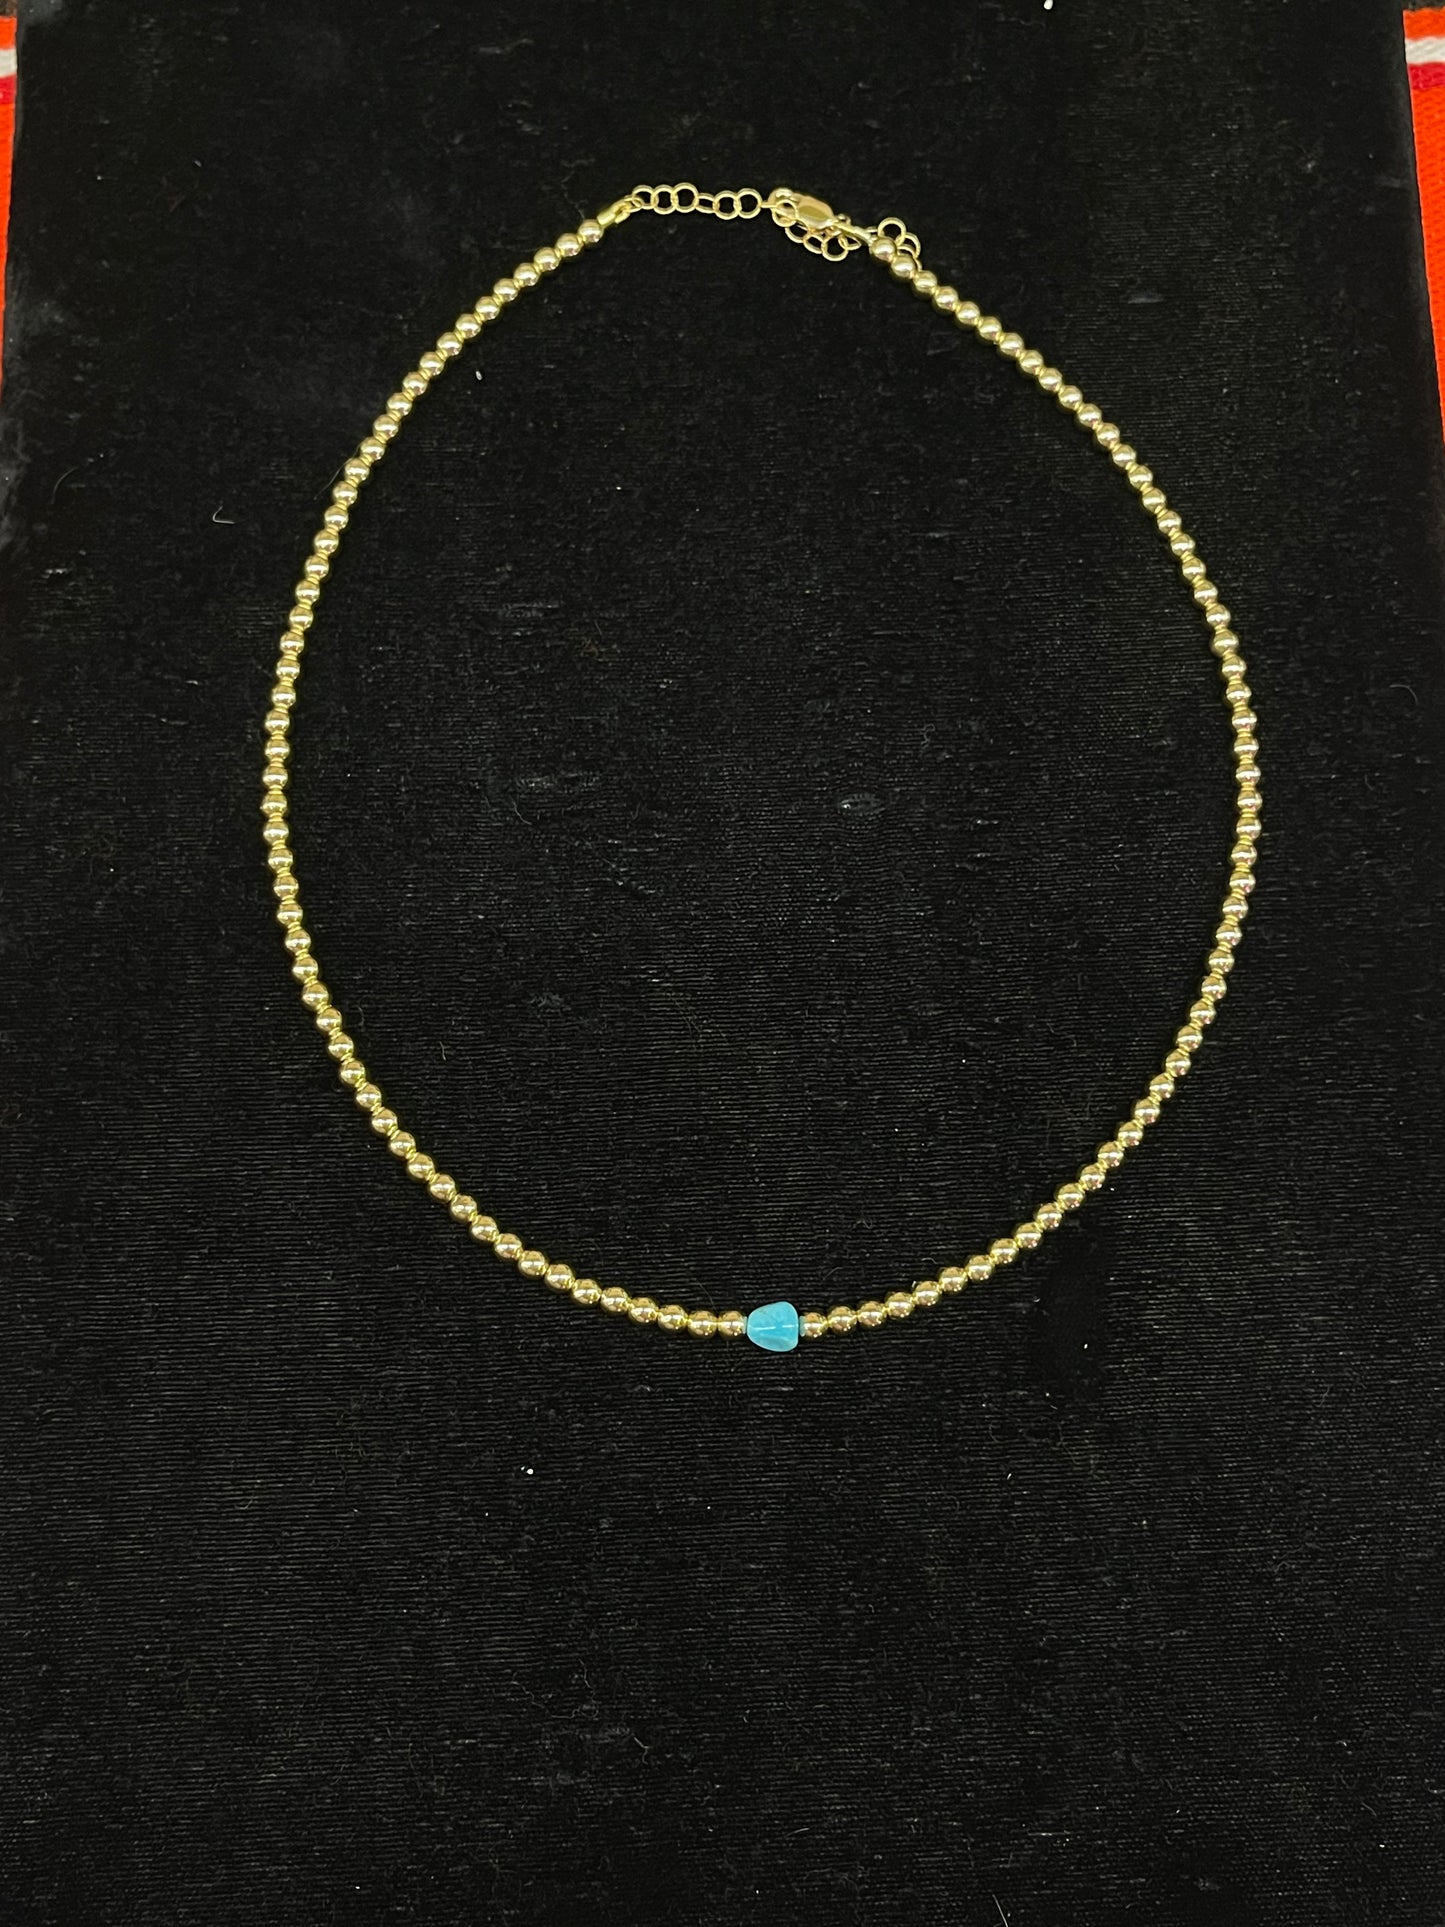 14K Gold Filled Necklace with Turquoise Stone